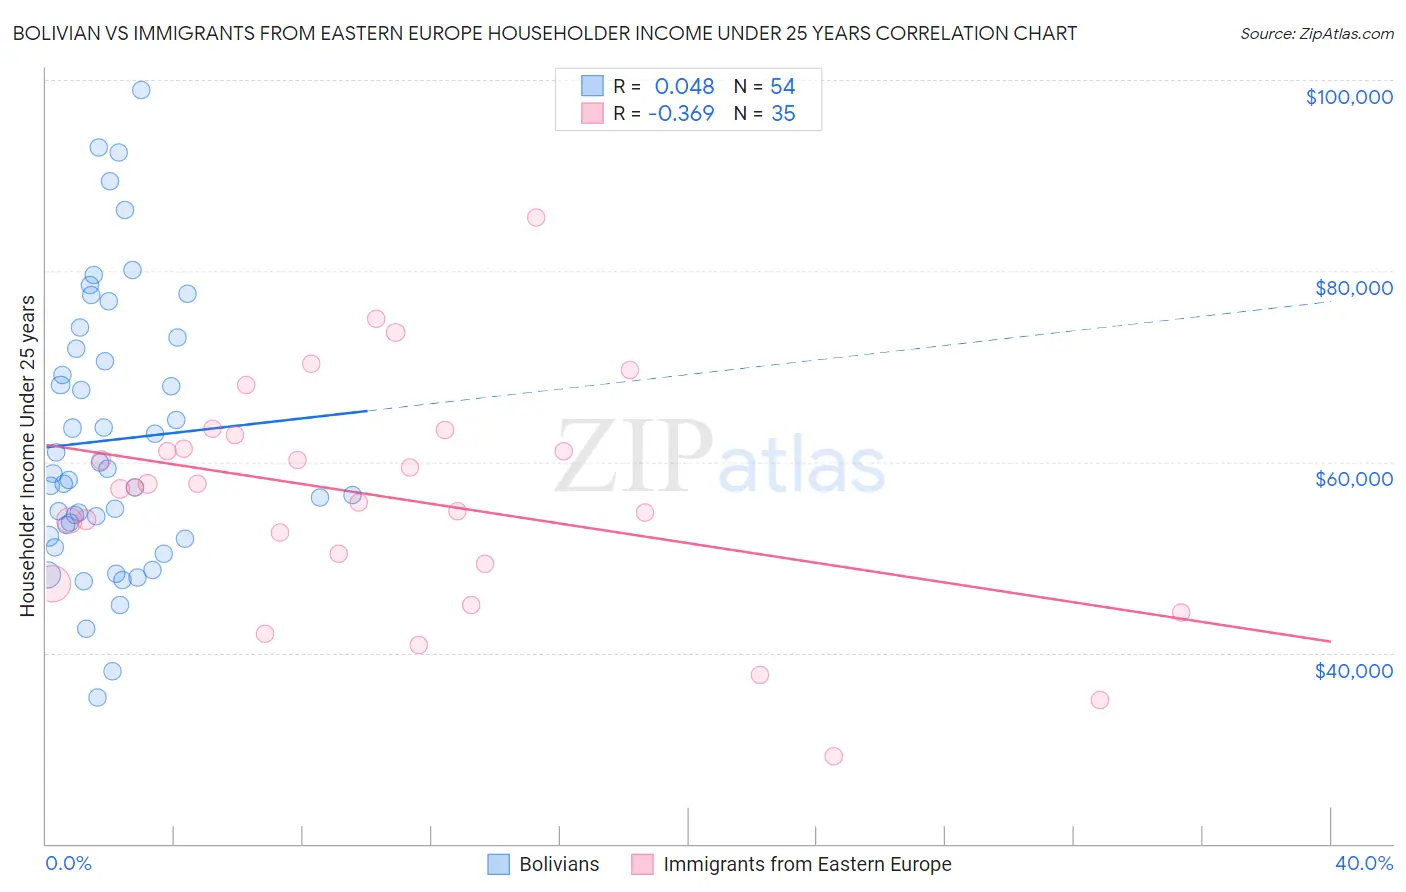 Bolivian vs Immigrants from Eastern Europe Householder Income Under 25 years